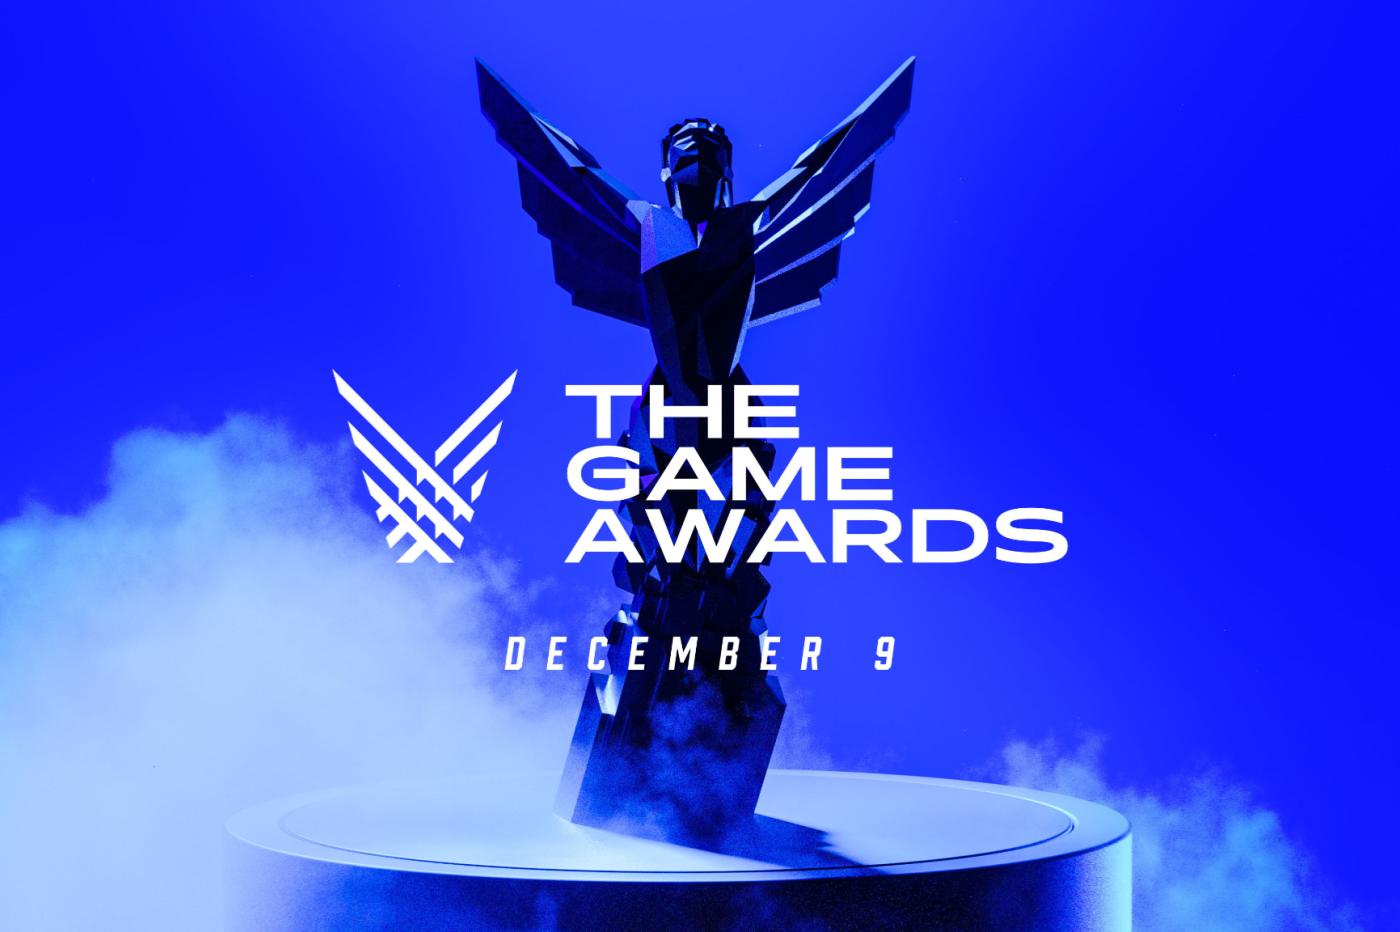 The Game awards nomine